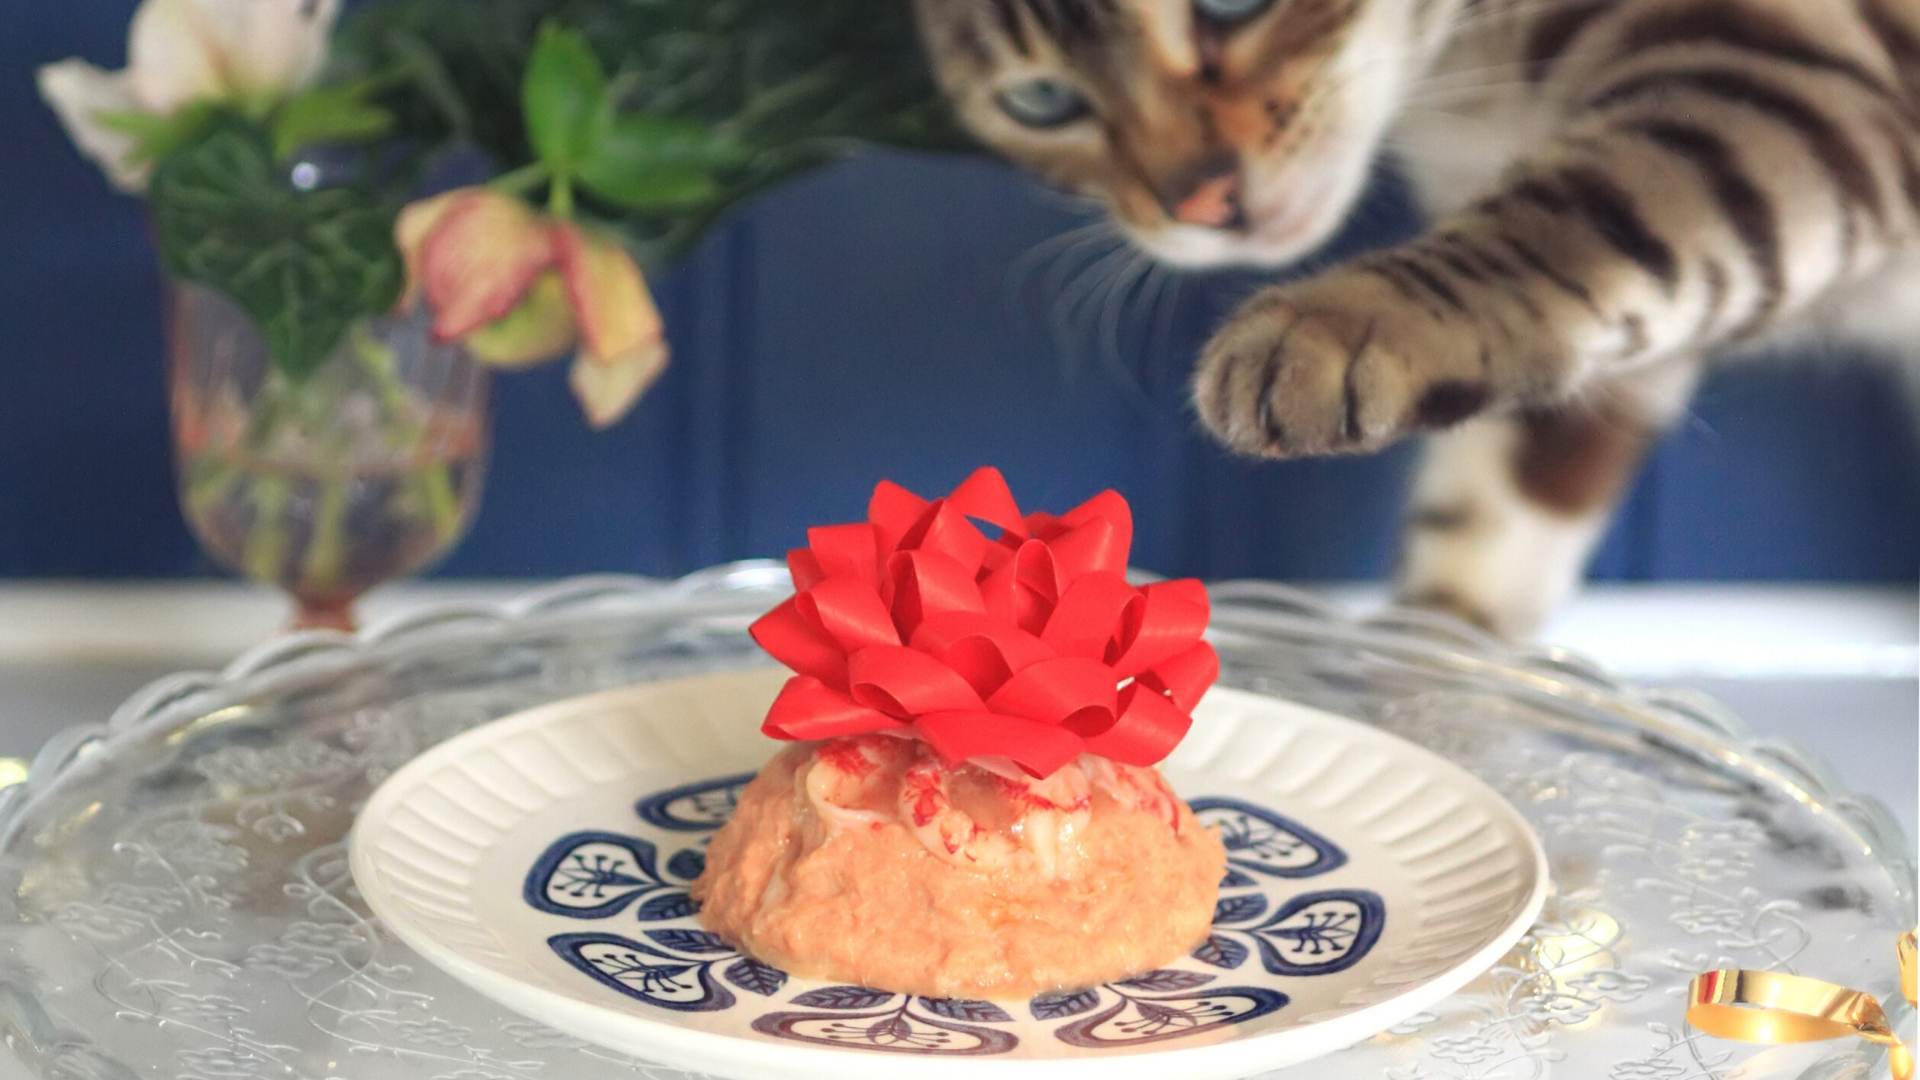 Cooking for your cat: Cat birthday cake recipe 